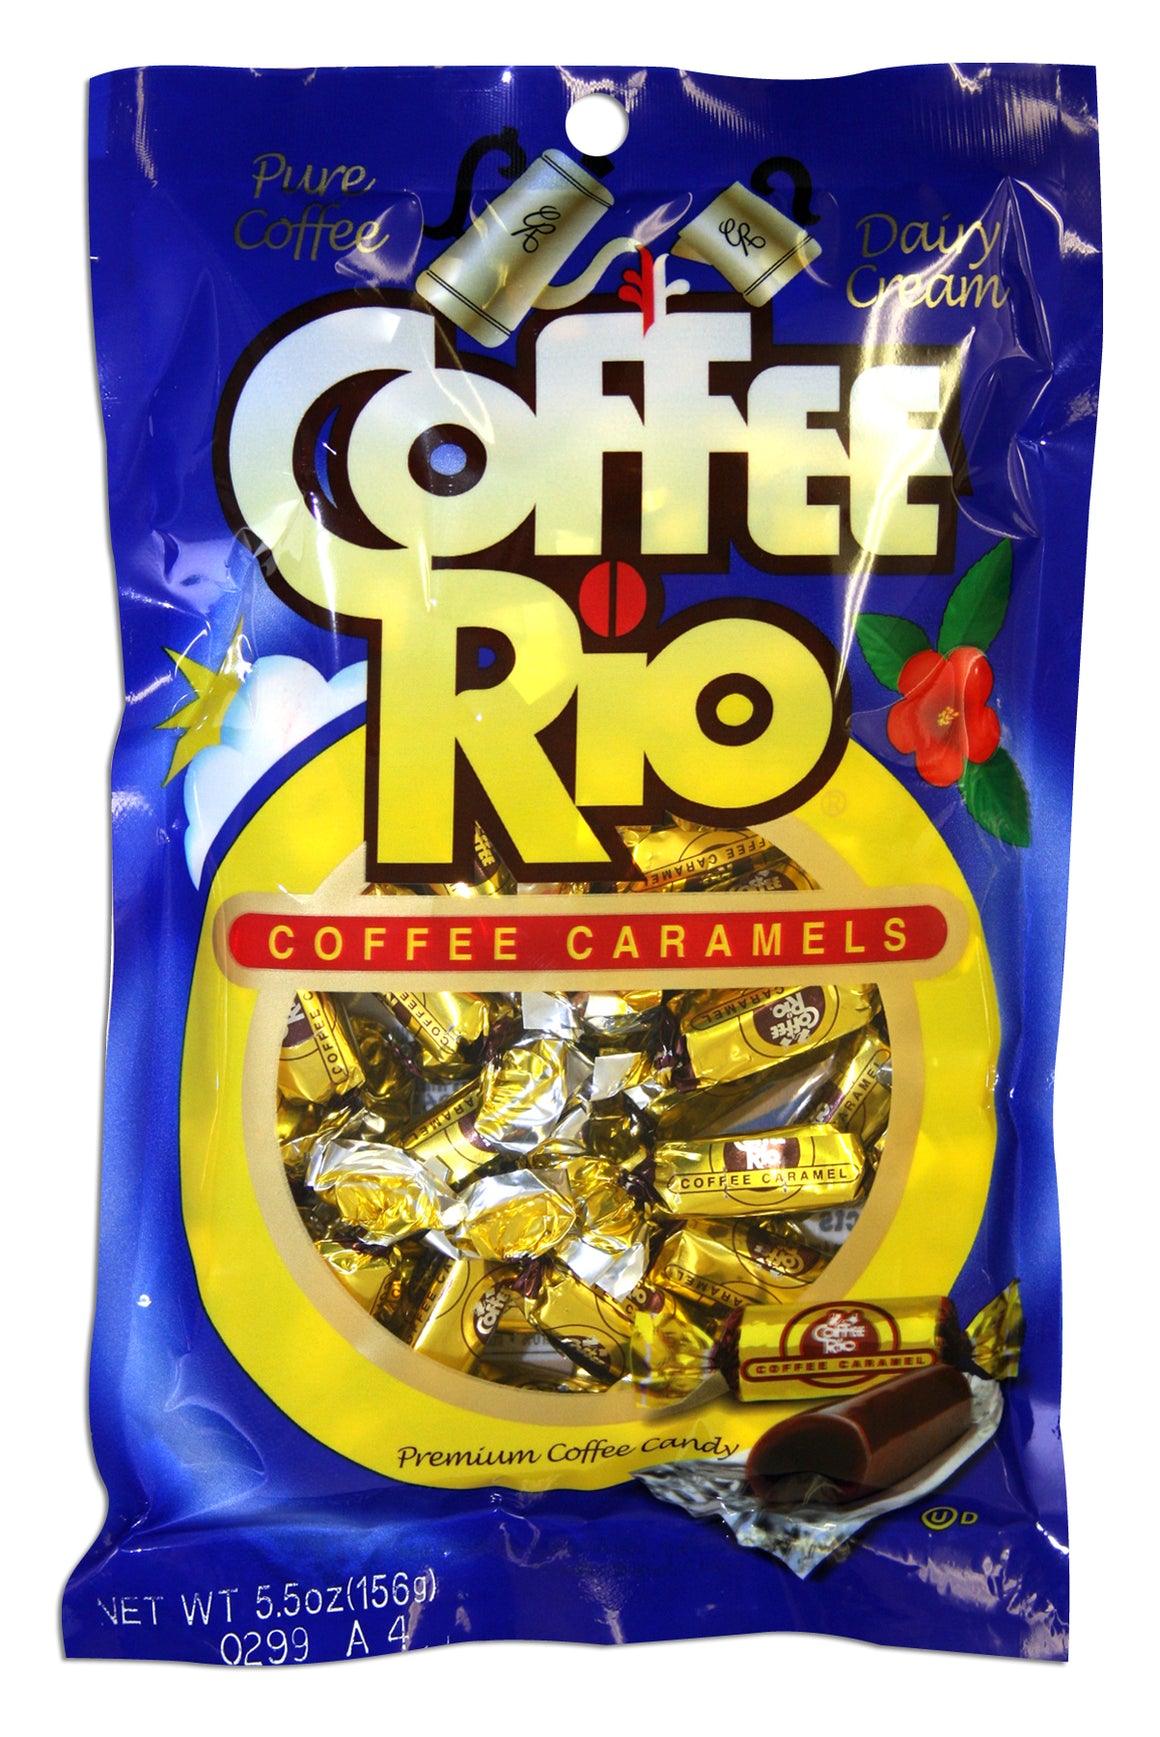 Coffee Rio Coffee Caramels 5.5 oz. Bag. For fresh candy and great service, visit www.allcitycandy.com